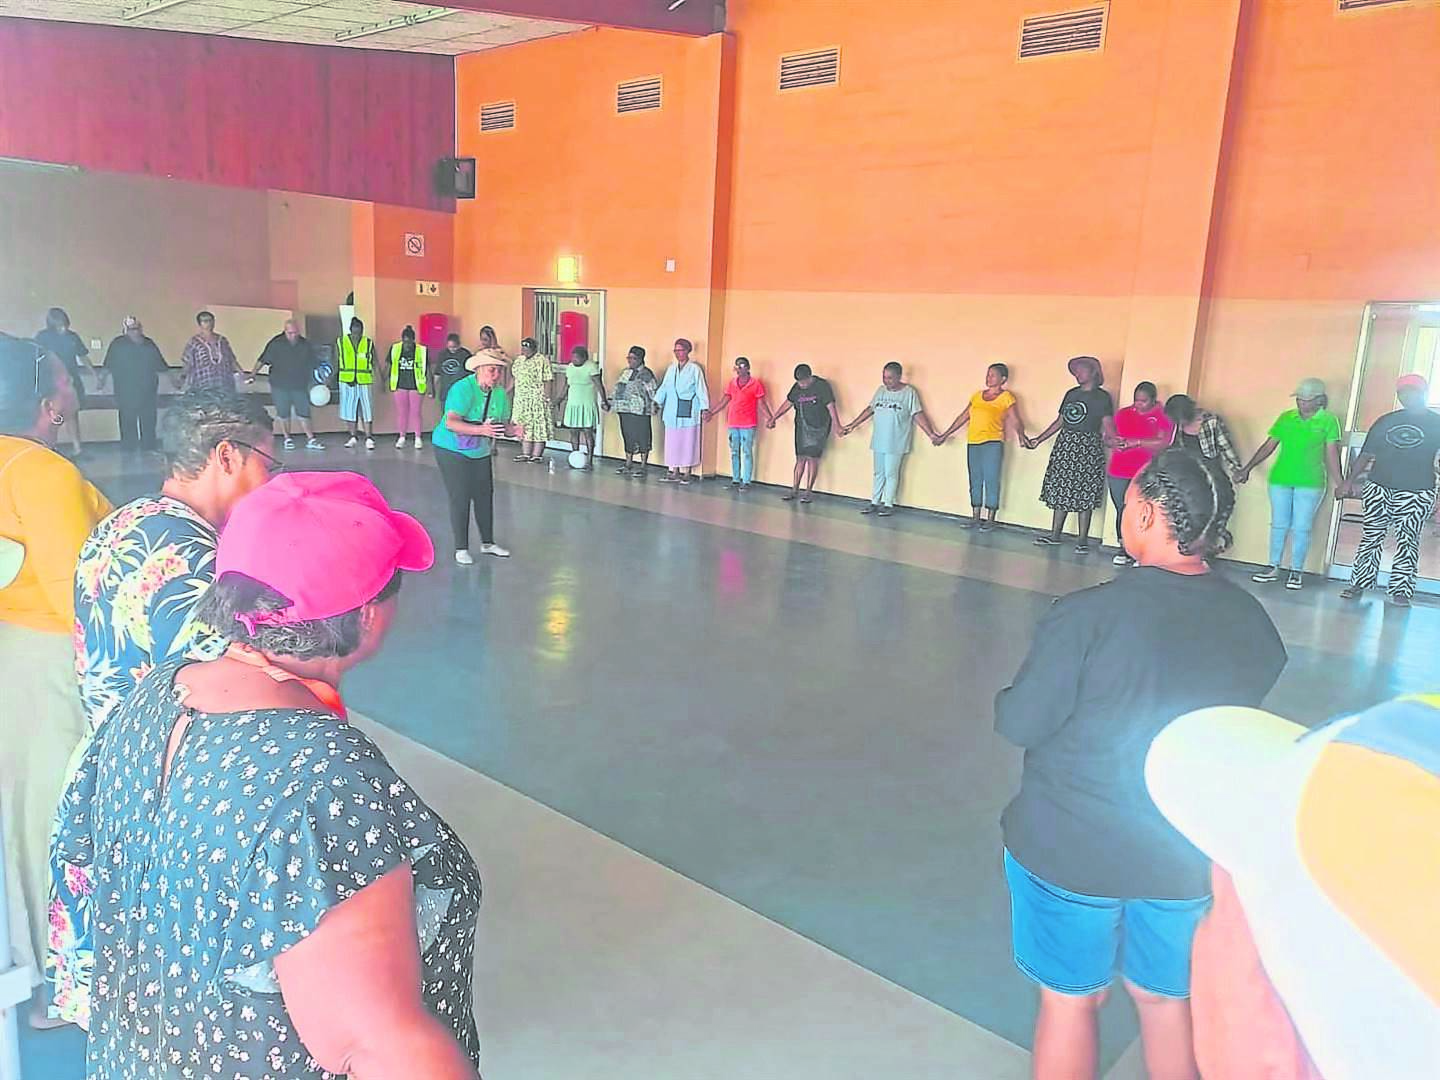 A mass prayer was held at the Kilimanjaro Community hall in Tafelsig, Mitchell’s Plain, calling on God’s protection over the life of Joslin Smith. According to the hosts, Broken Crayons Still Colour, the event held on Friday (23 February), Joslin’s case reminded residents of various local cases of missing children.Photo: Samantha-Lee Jacobs